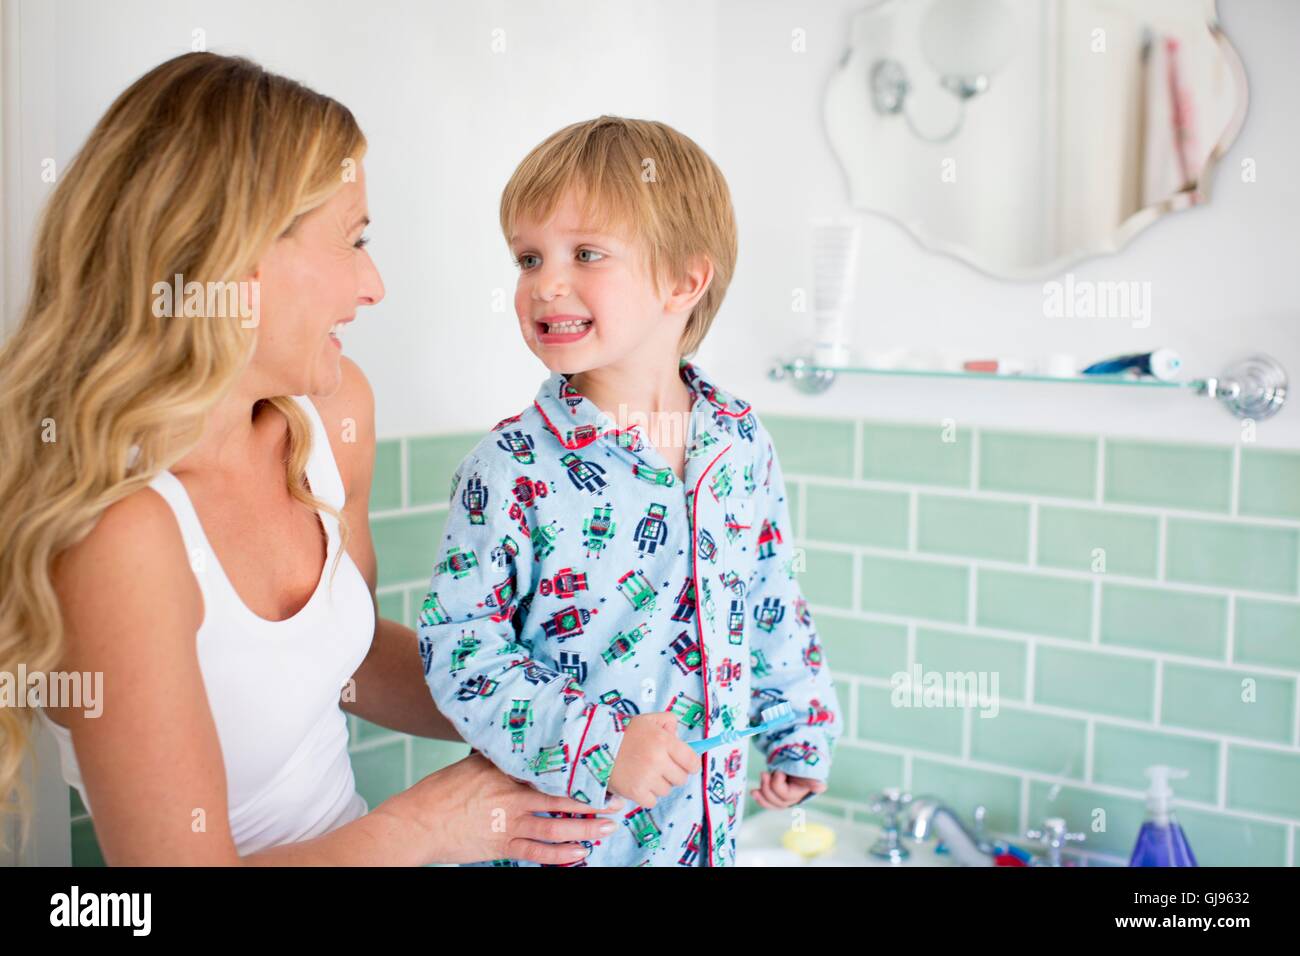 PROPERTY RELEASED. MODEL RELEASED. Mother and son in bathroom brushing teeth. Stock Photo